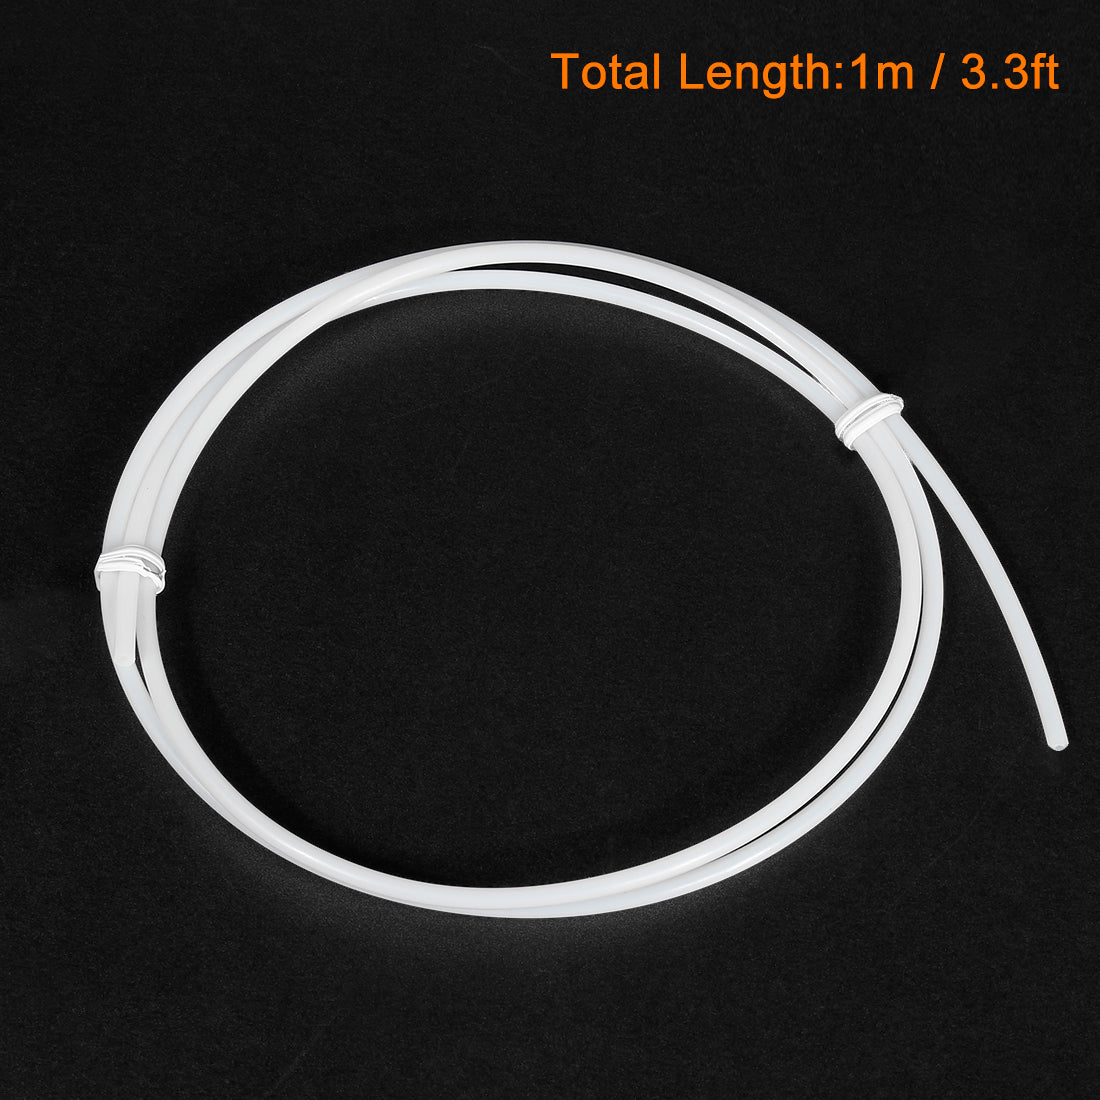 uxcell Uxcell PTFE Tube Tubing 1 Meter 3.3ft Lengh Pipe 1mm ID 3mm OD for 3D Printer RepRap